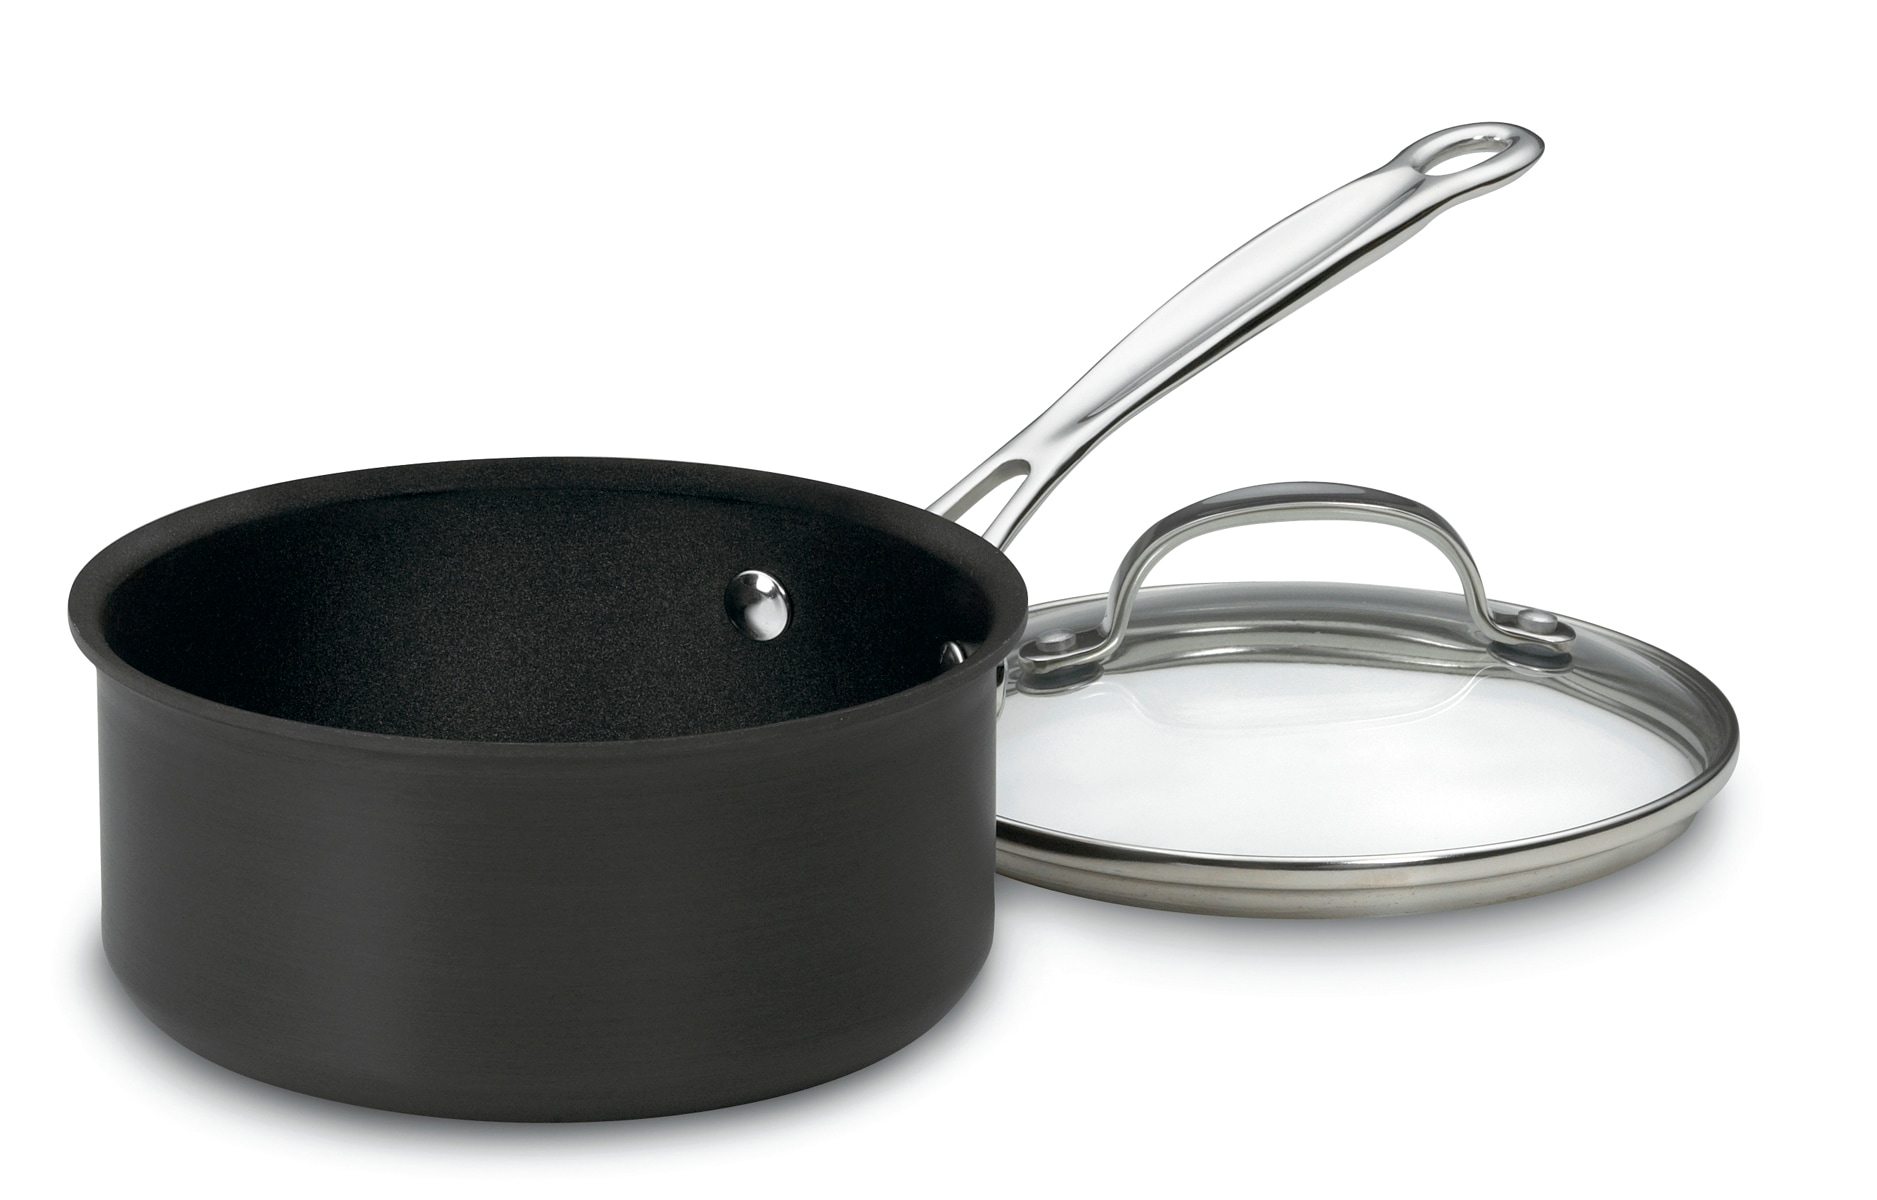 Deal Of The Day September 10: Cuisinart Pots And Pans